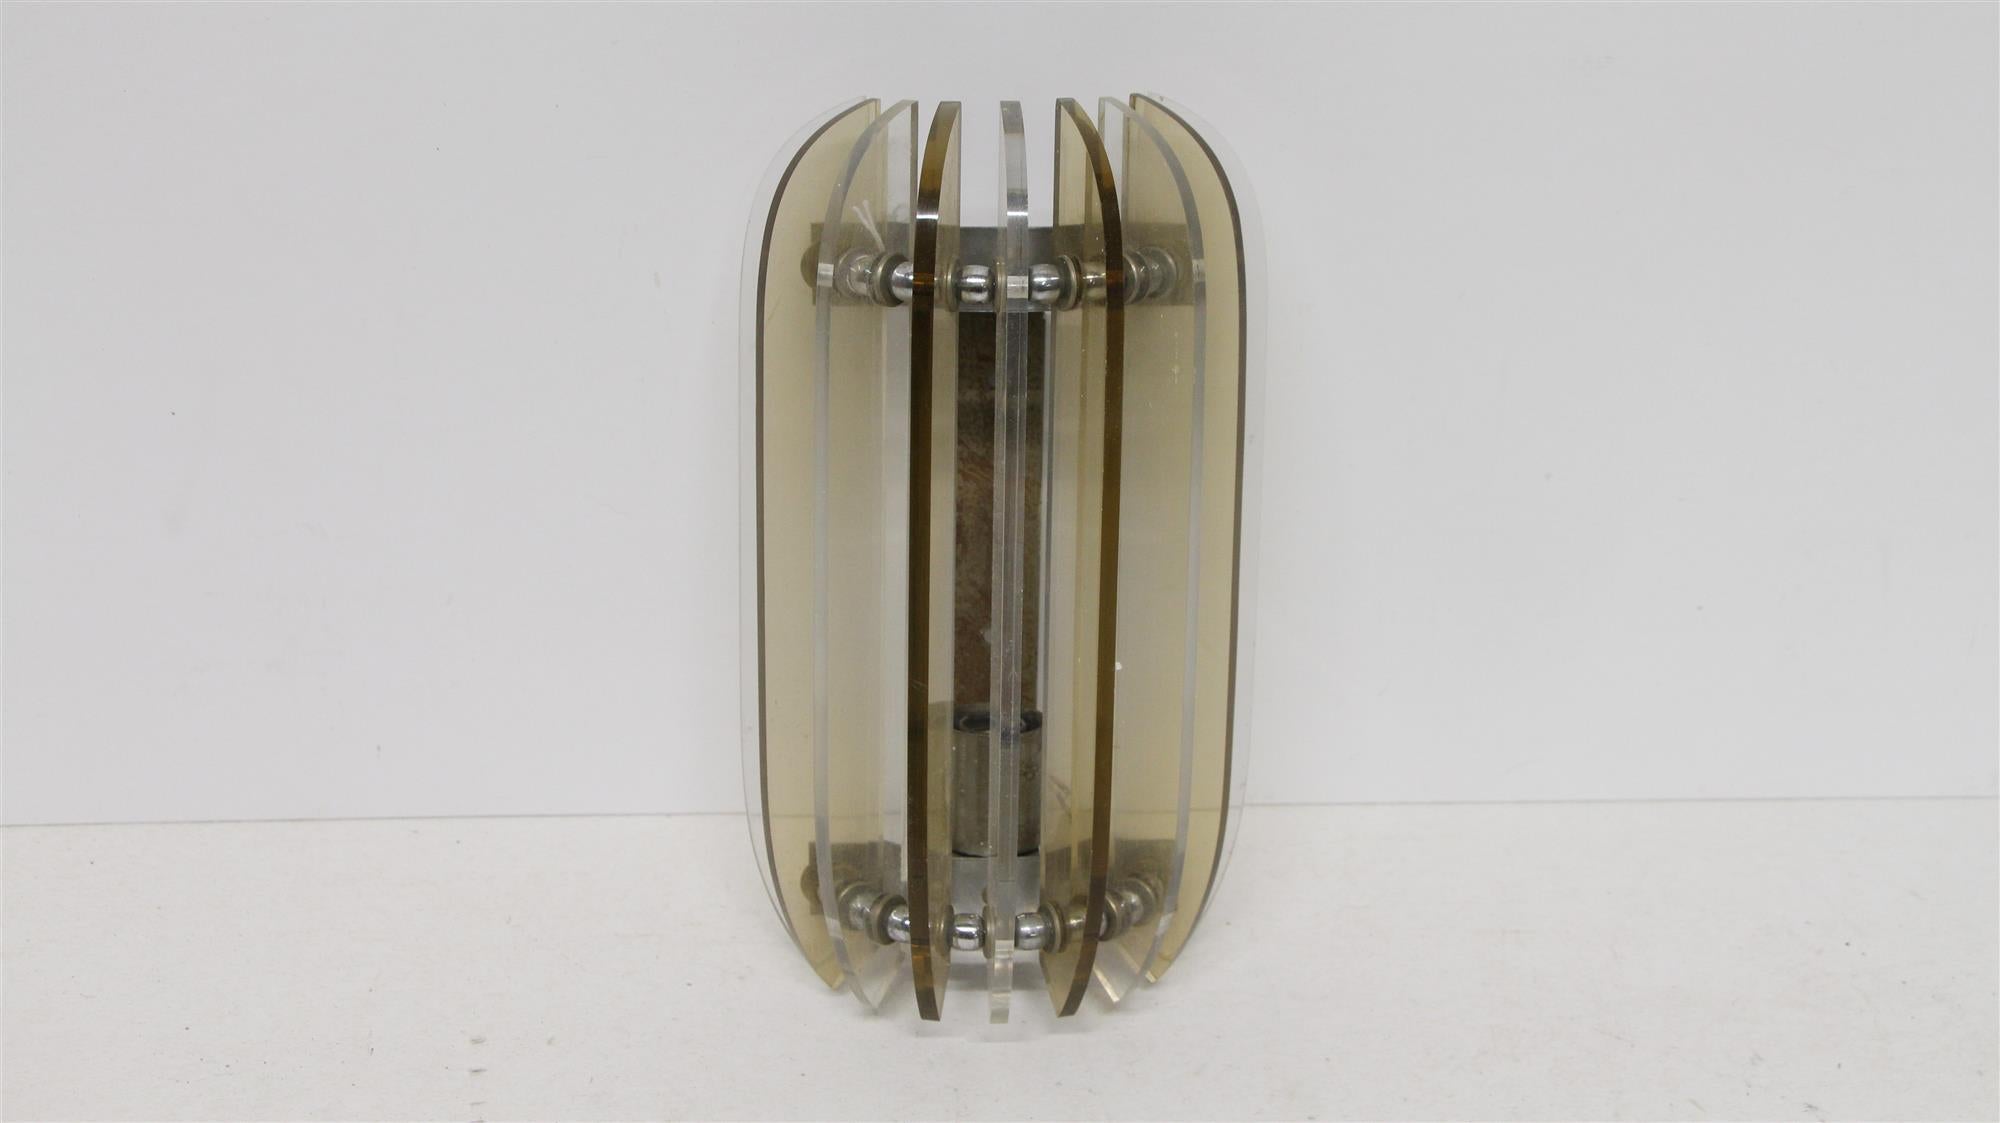 1980s Mid-Century Modern Italian Lucite wall sconces with a metal frame. Priced as a pair. This can be seen at our 71 8th Ave location near the Meatpacking District in Manhattan.